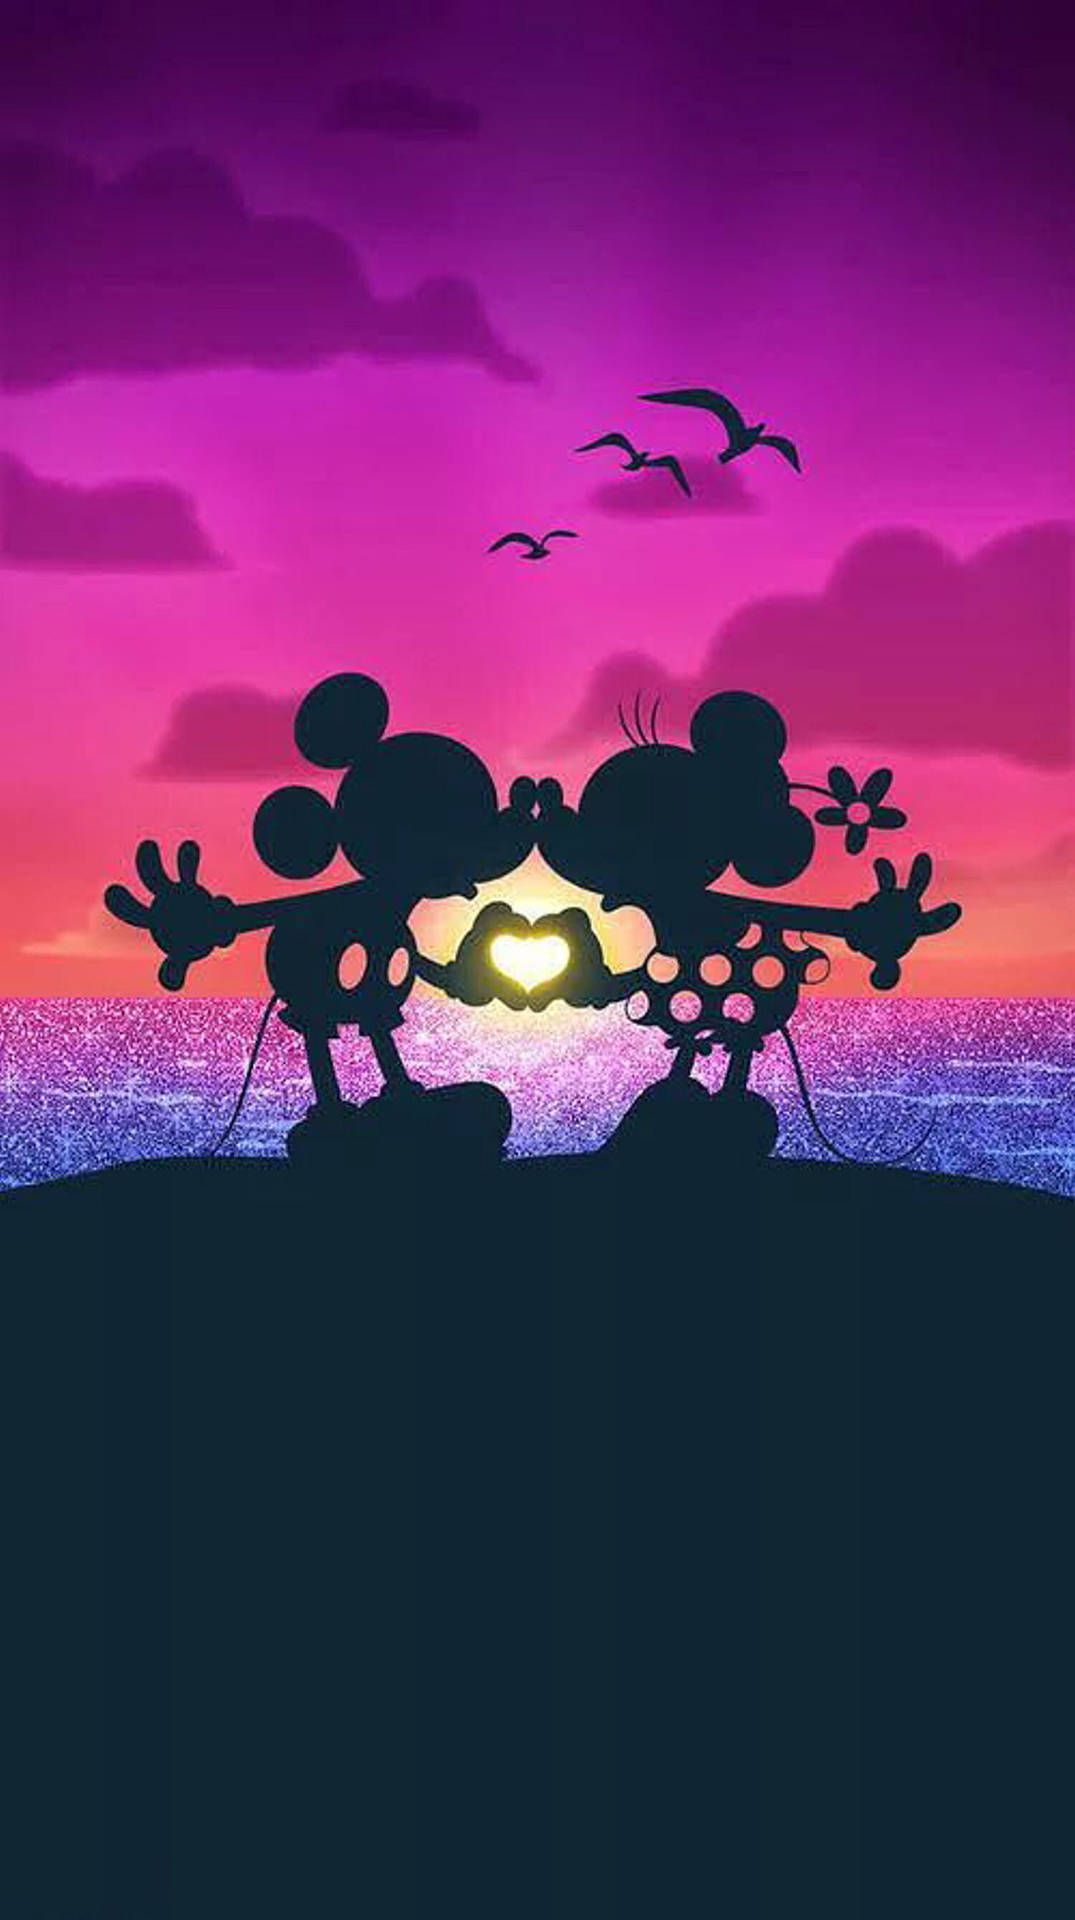 Mickey and Minnie Mouse holding hands in front of a sunset - Minnie Mouse